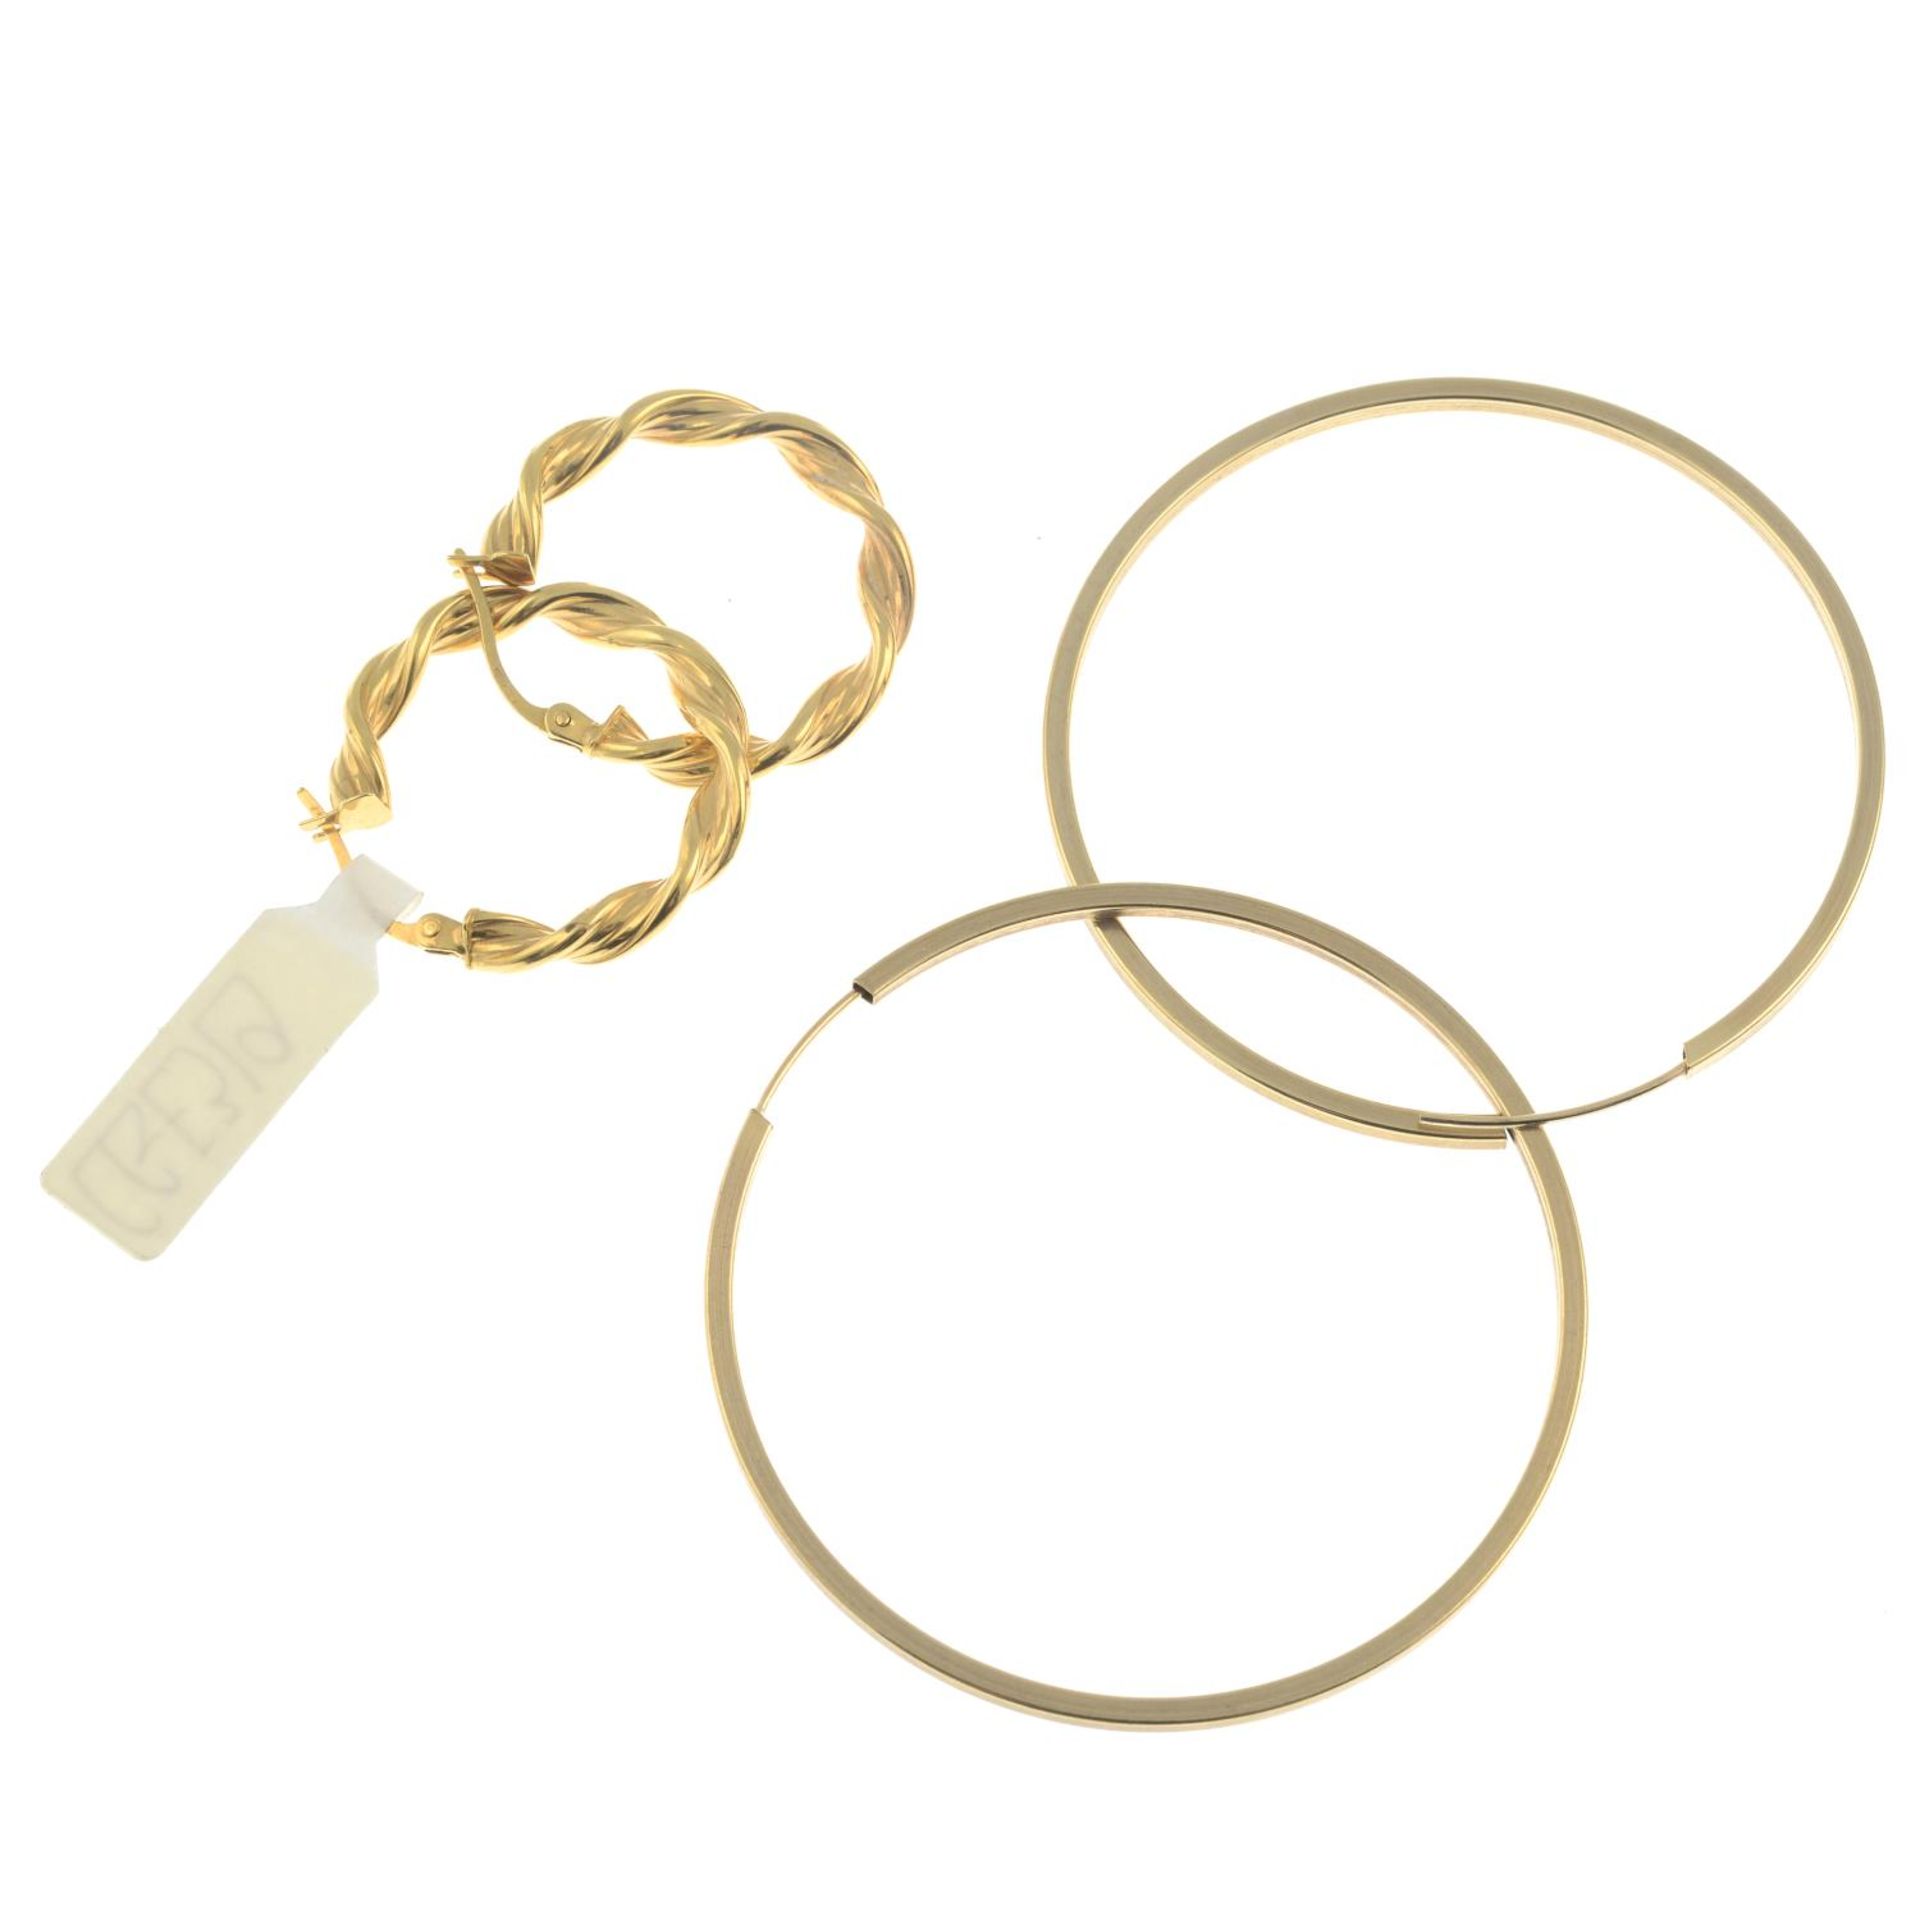 Two pairs of 9ct gold hoop earrings, hallmarks for 9ct gold, lengths 3.5 and 5.1cms, 9gms. - Image 2 of 2